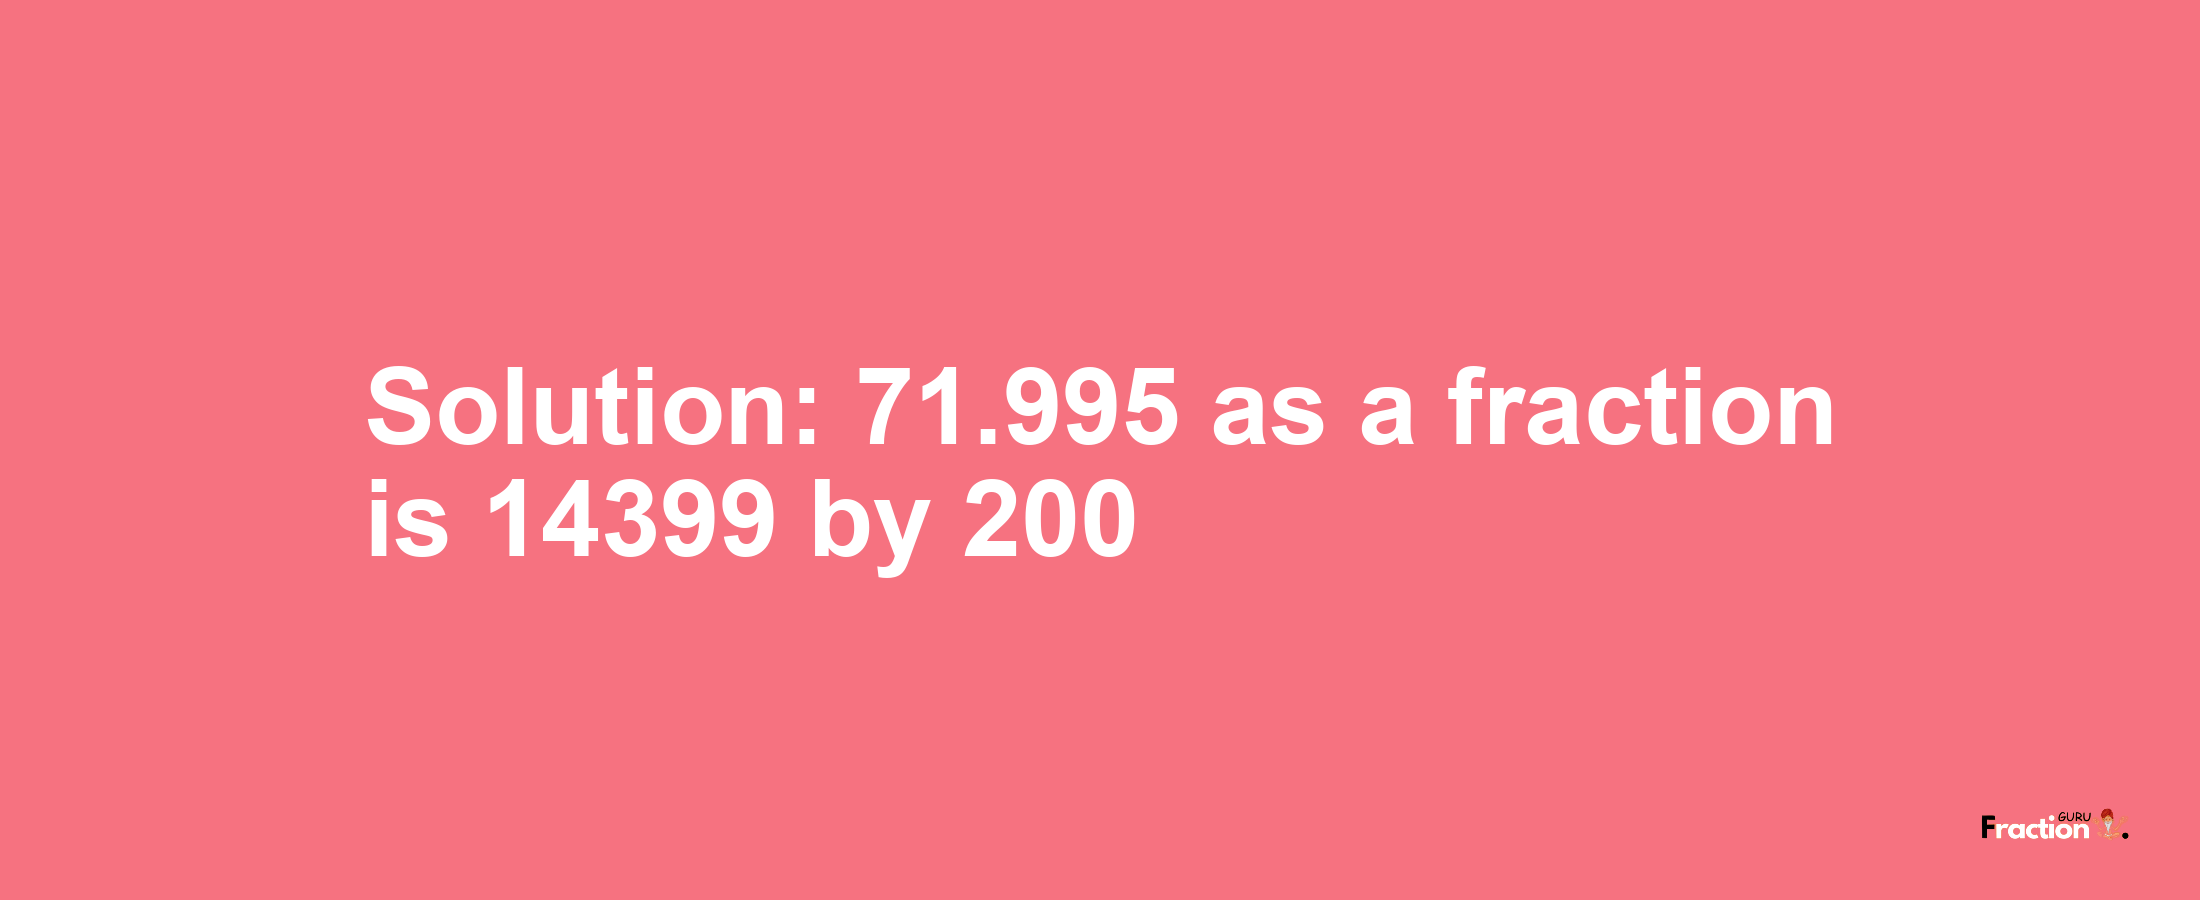 Solution:71.995 as a fraction is 14399/200